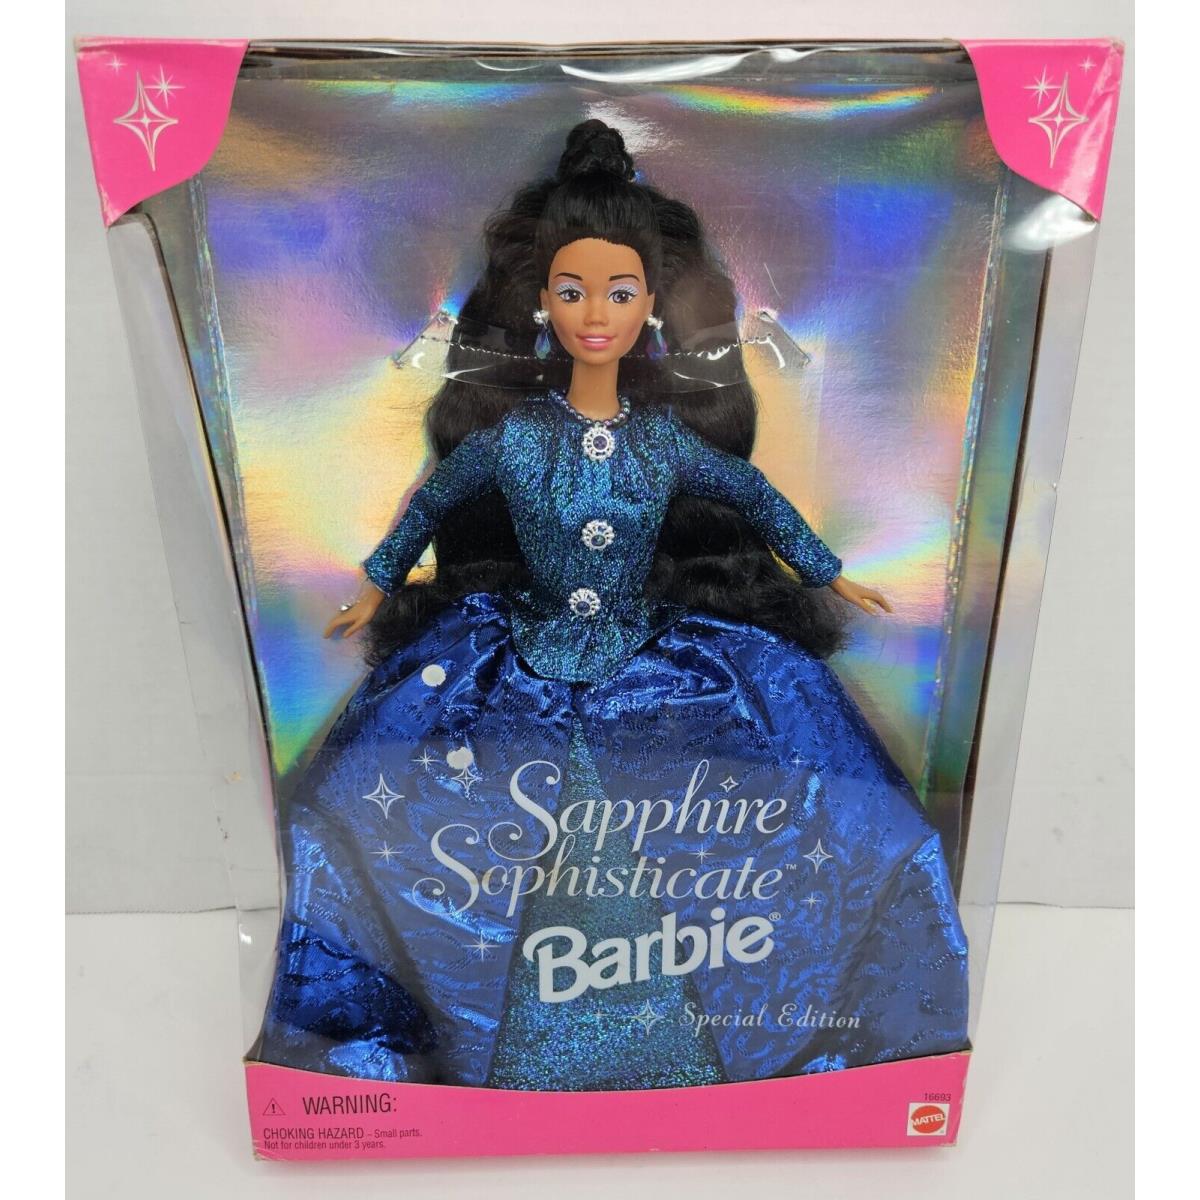 Sapphire Sophisticate Barbie African American Special Edition 16693 Mattel